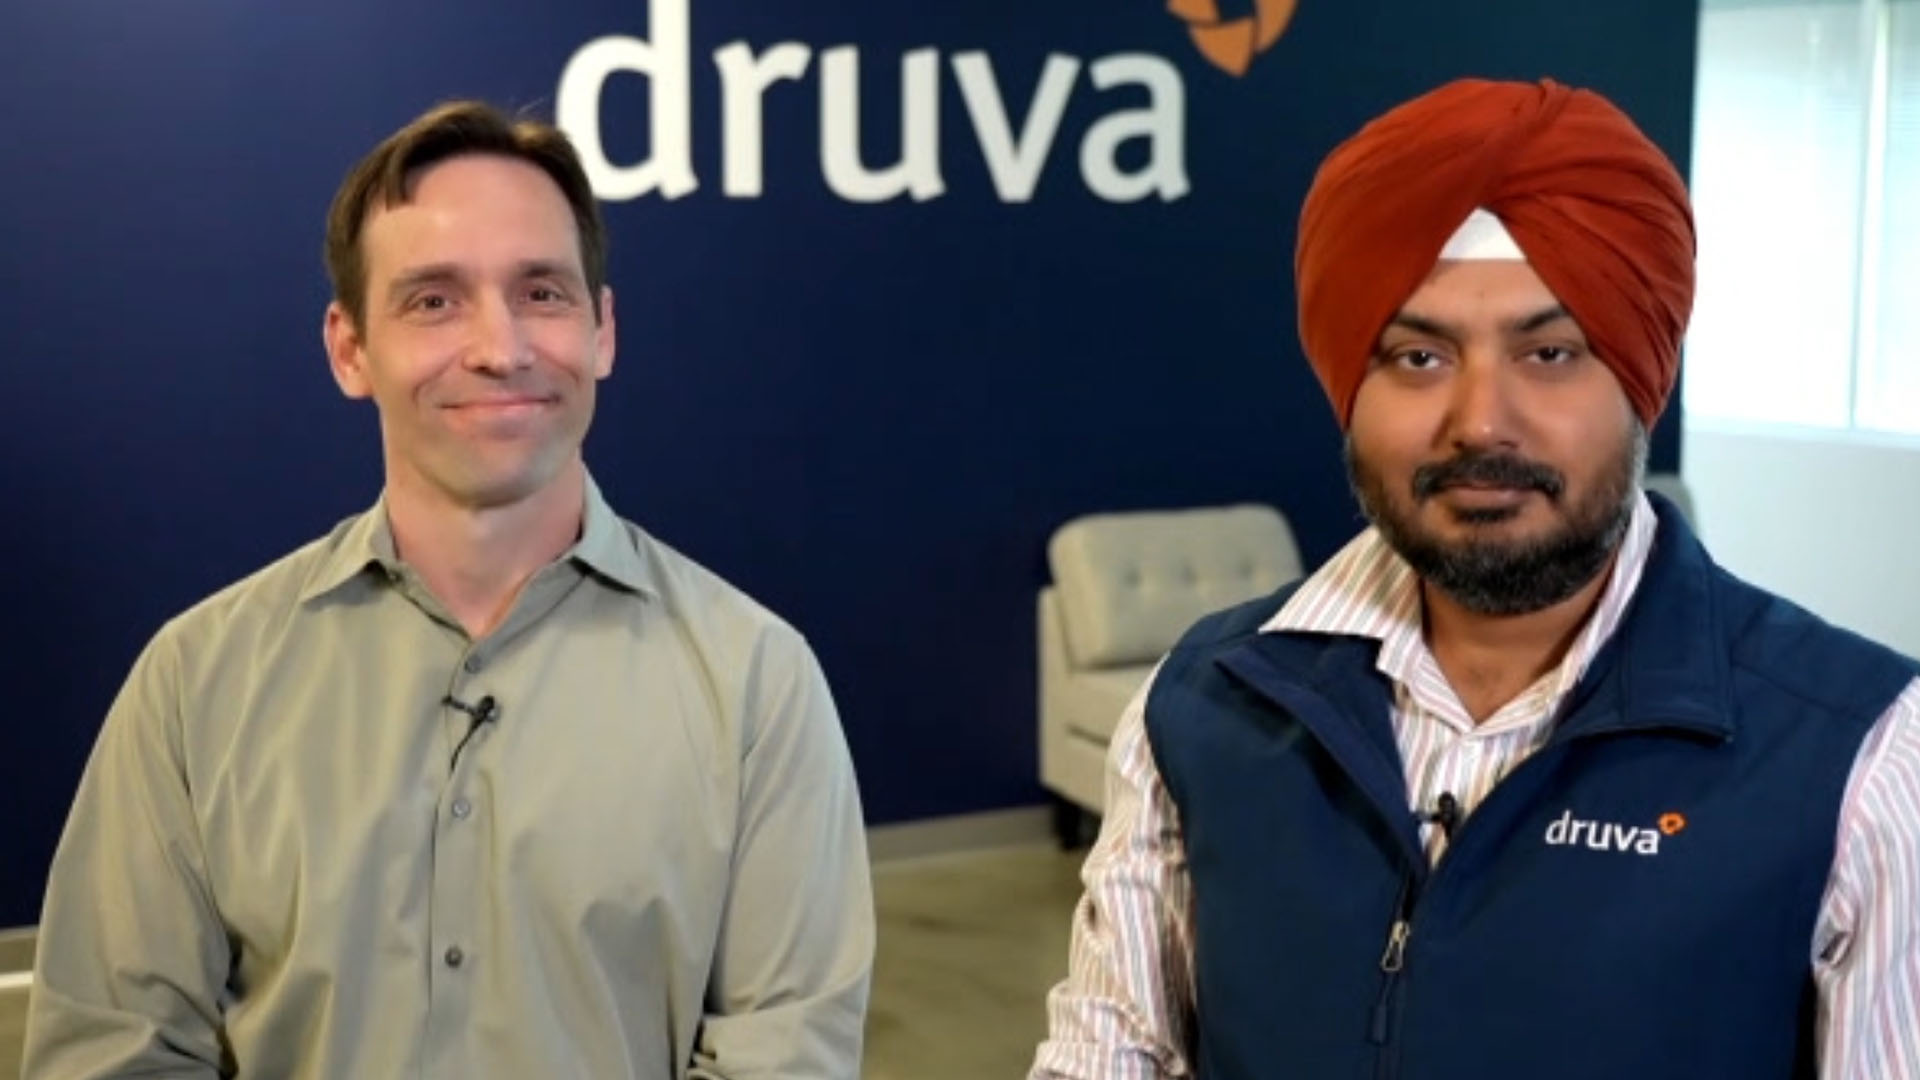 Druva's new data resiliency guarantee offers up to $10M in coverage - SiliconANGLE